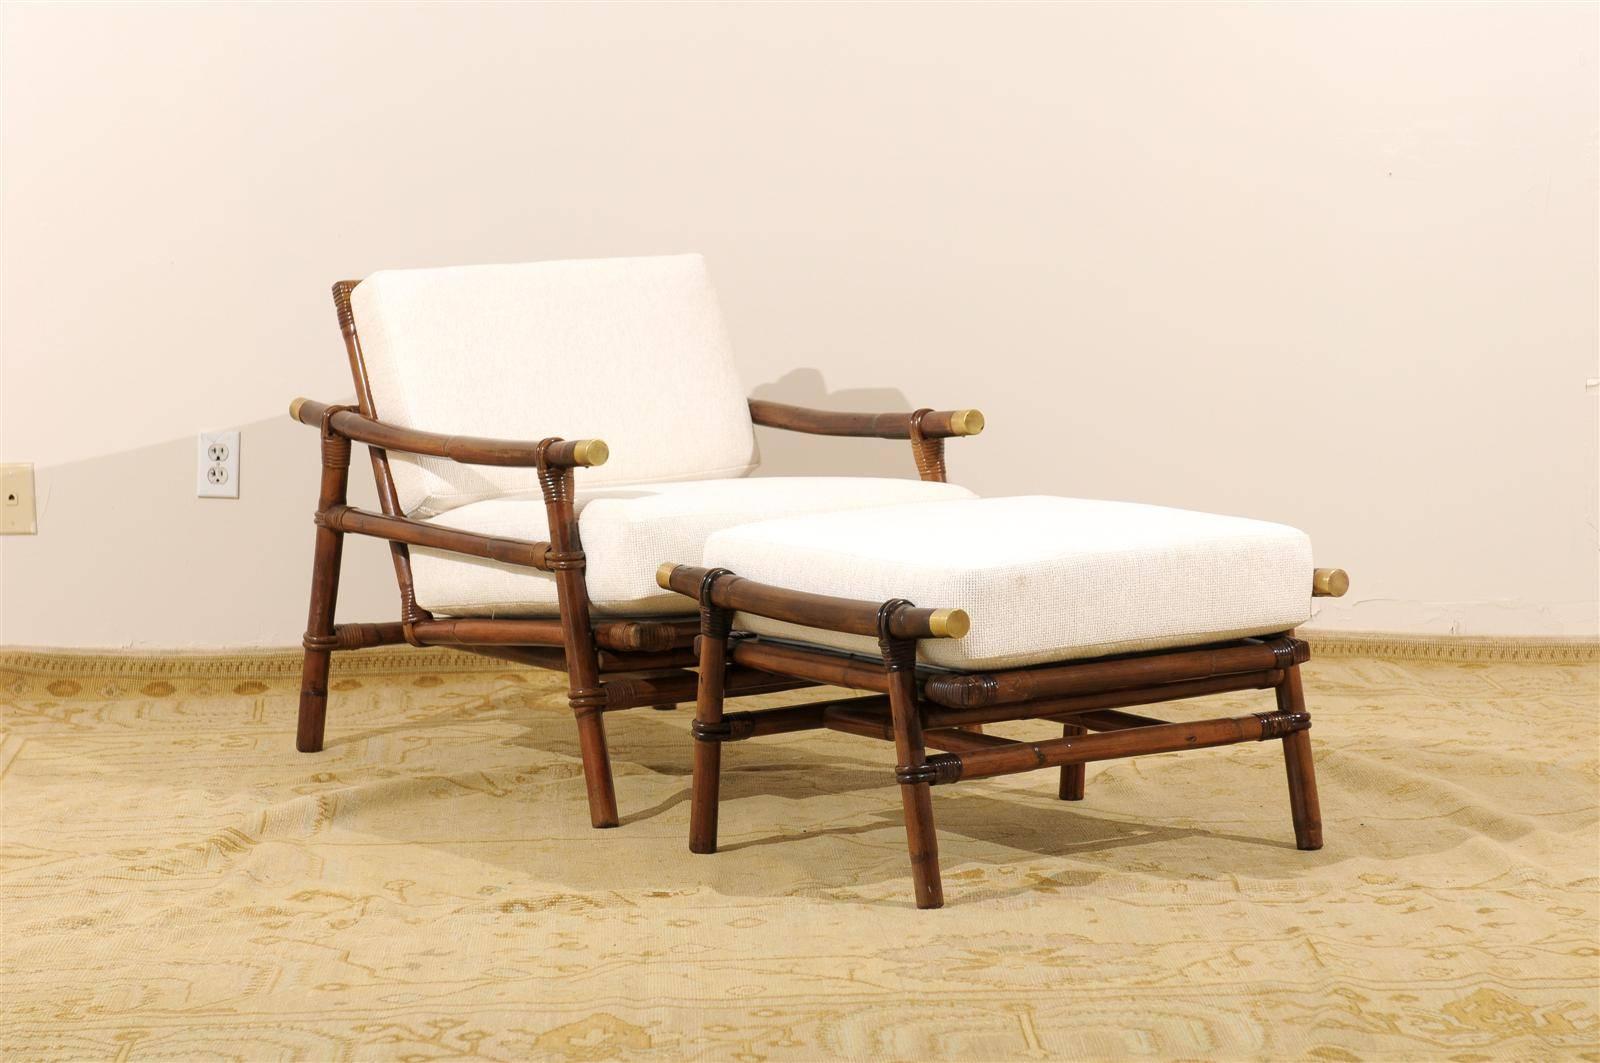 These magnificent lounge chairs are shipped as professionally photographed and described in the listing narrative: Meticulously professionally restored and installation ready. Expert custom upholstery service is available.

An exceptional pair of